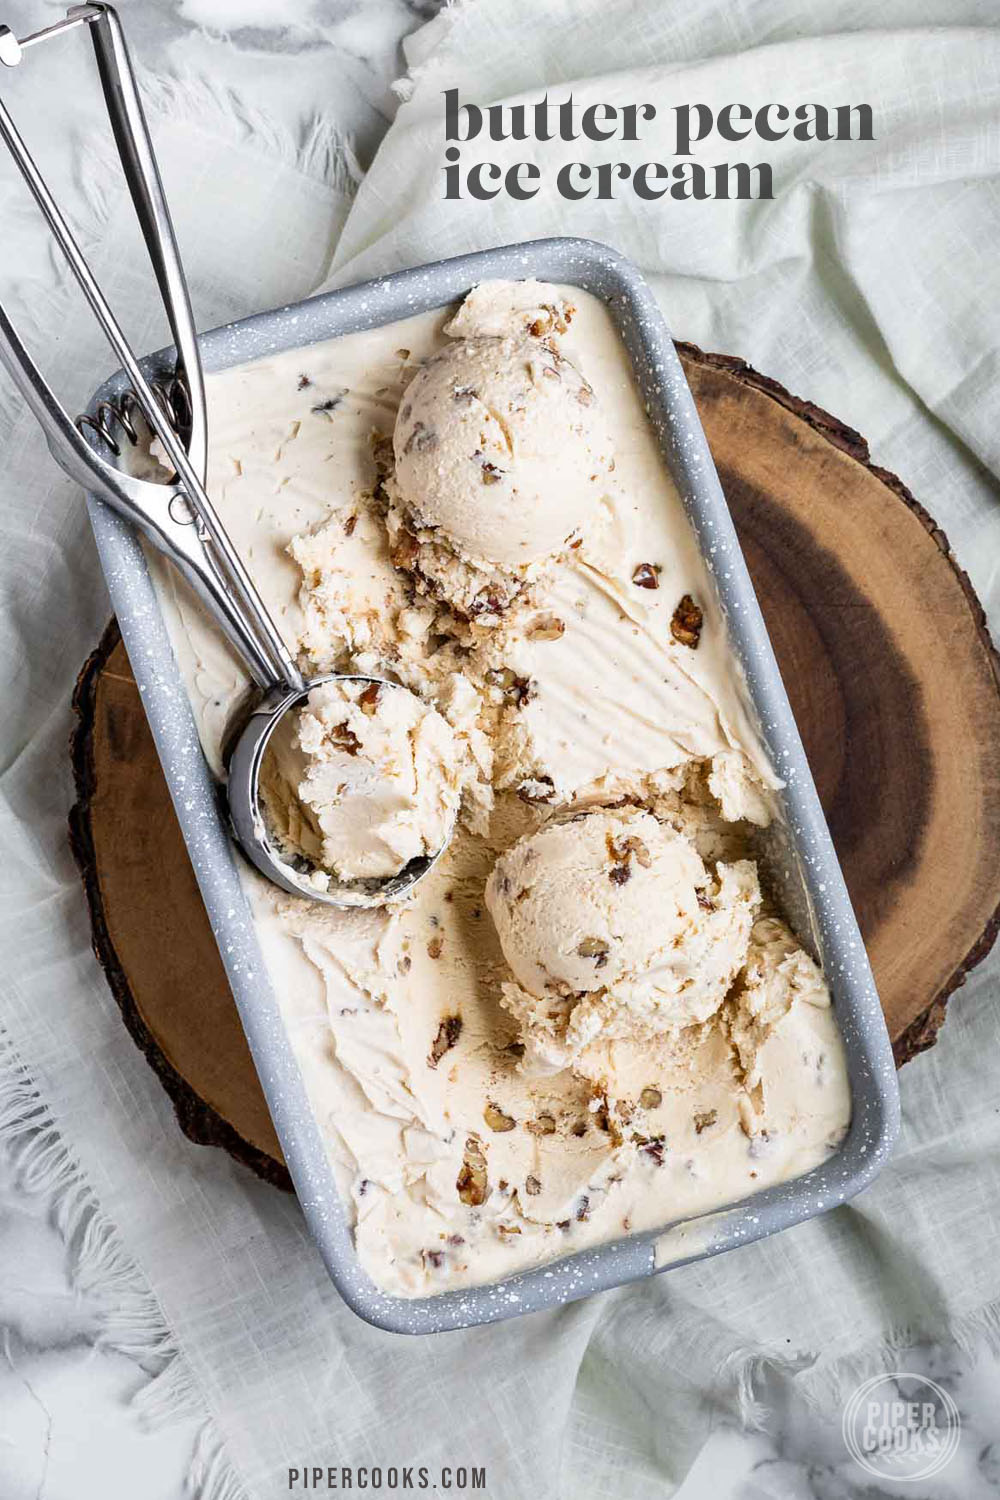 Butter pecan ice with chopped pecans in it in a bowl with a text title for Pinterest.